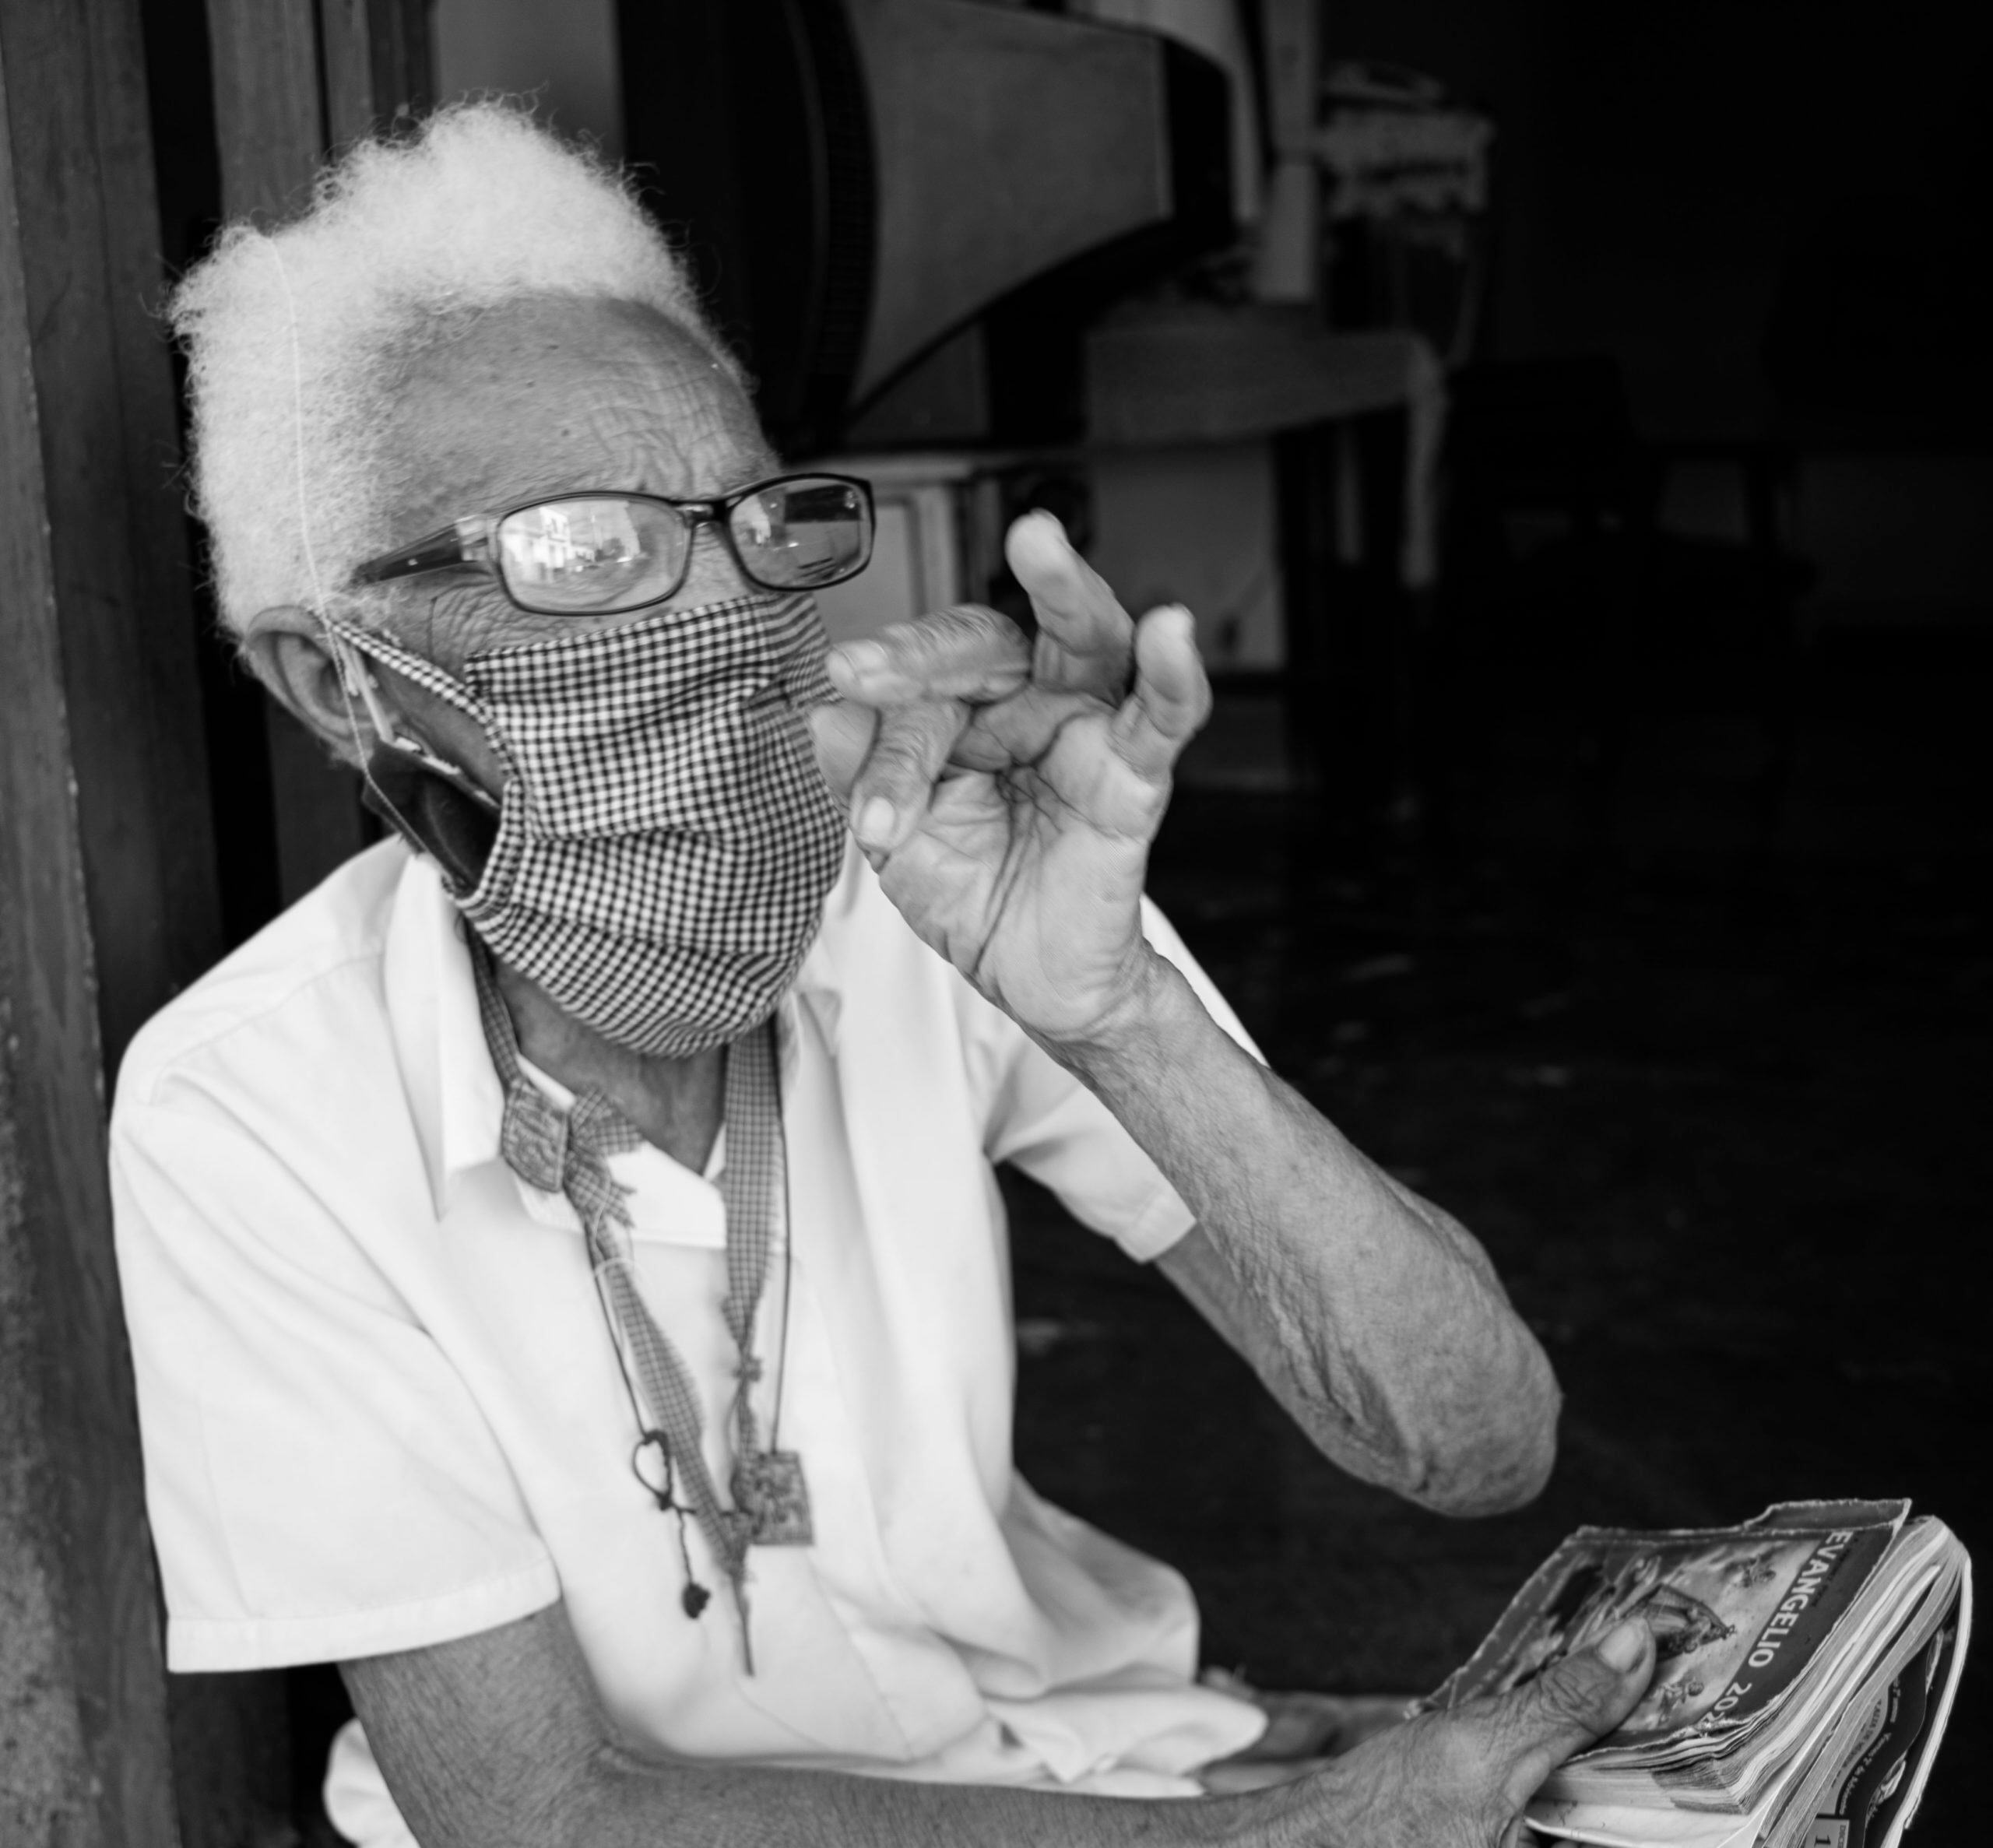 Elena Solís, 81 years old and living in Trinidad, recalls her involvement in the Cuban Revolution as a young woman. ©2022 John Elliott • www.TheHumanPulse.com